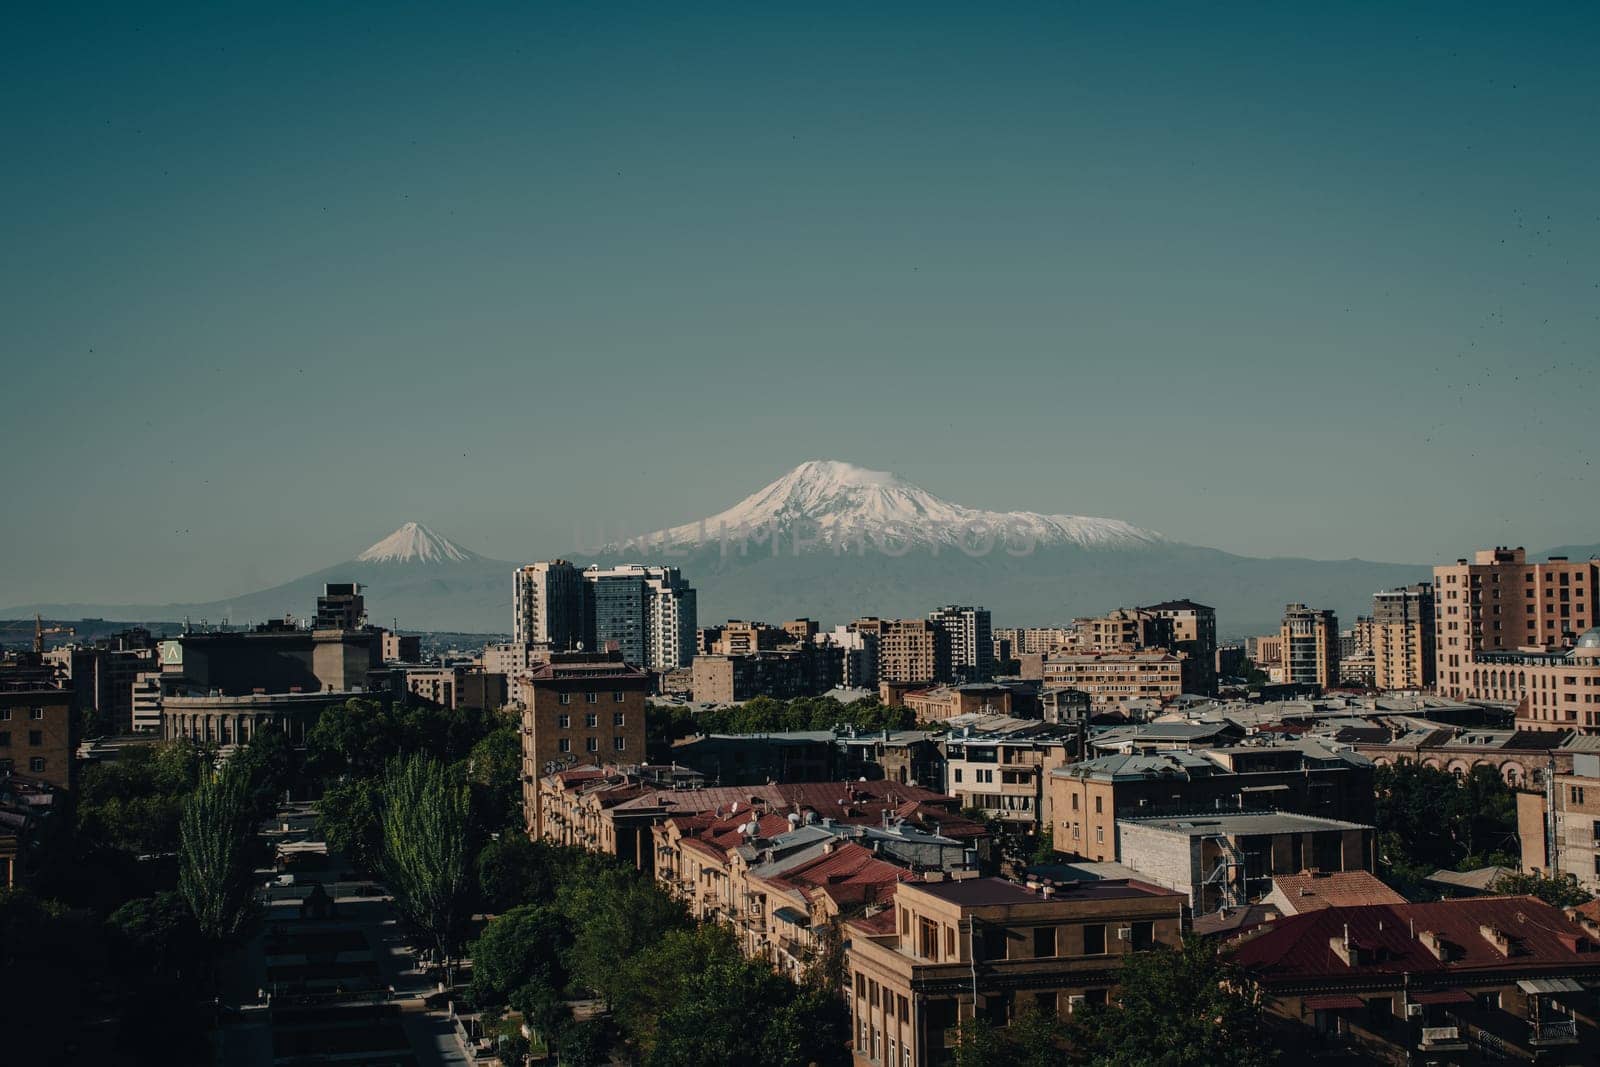 Cityscape with mountain view in a day time concept photo. Yerevan, capital of Armenia by _Nataly_Nati_